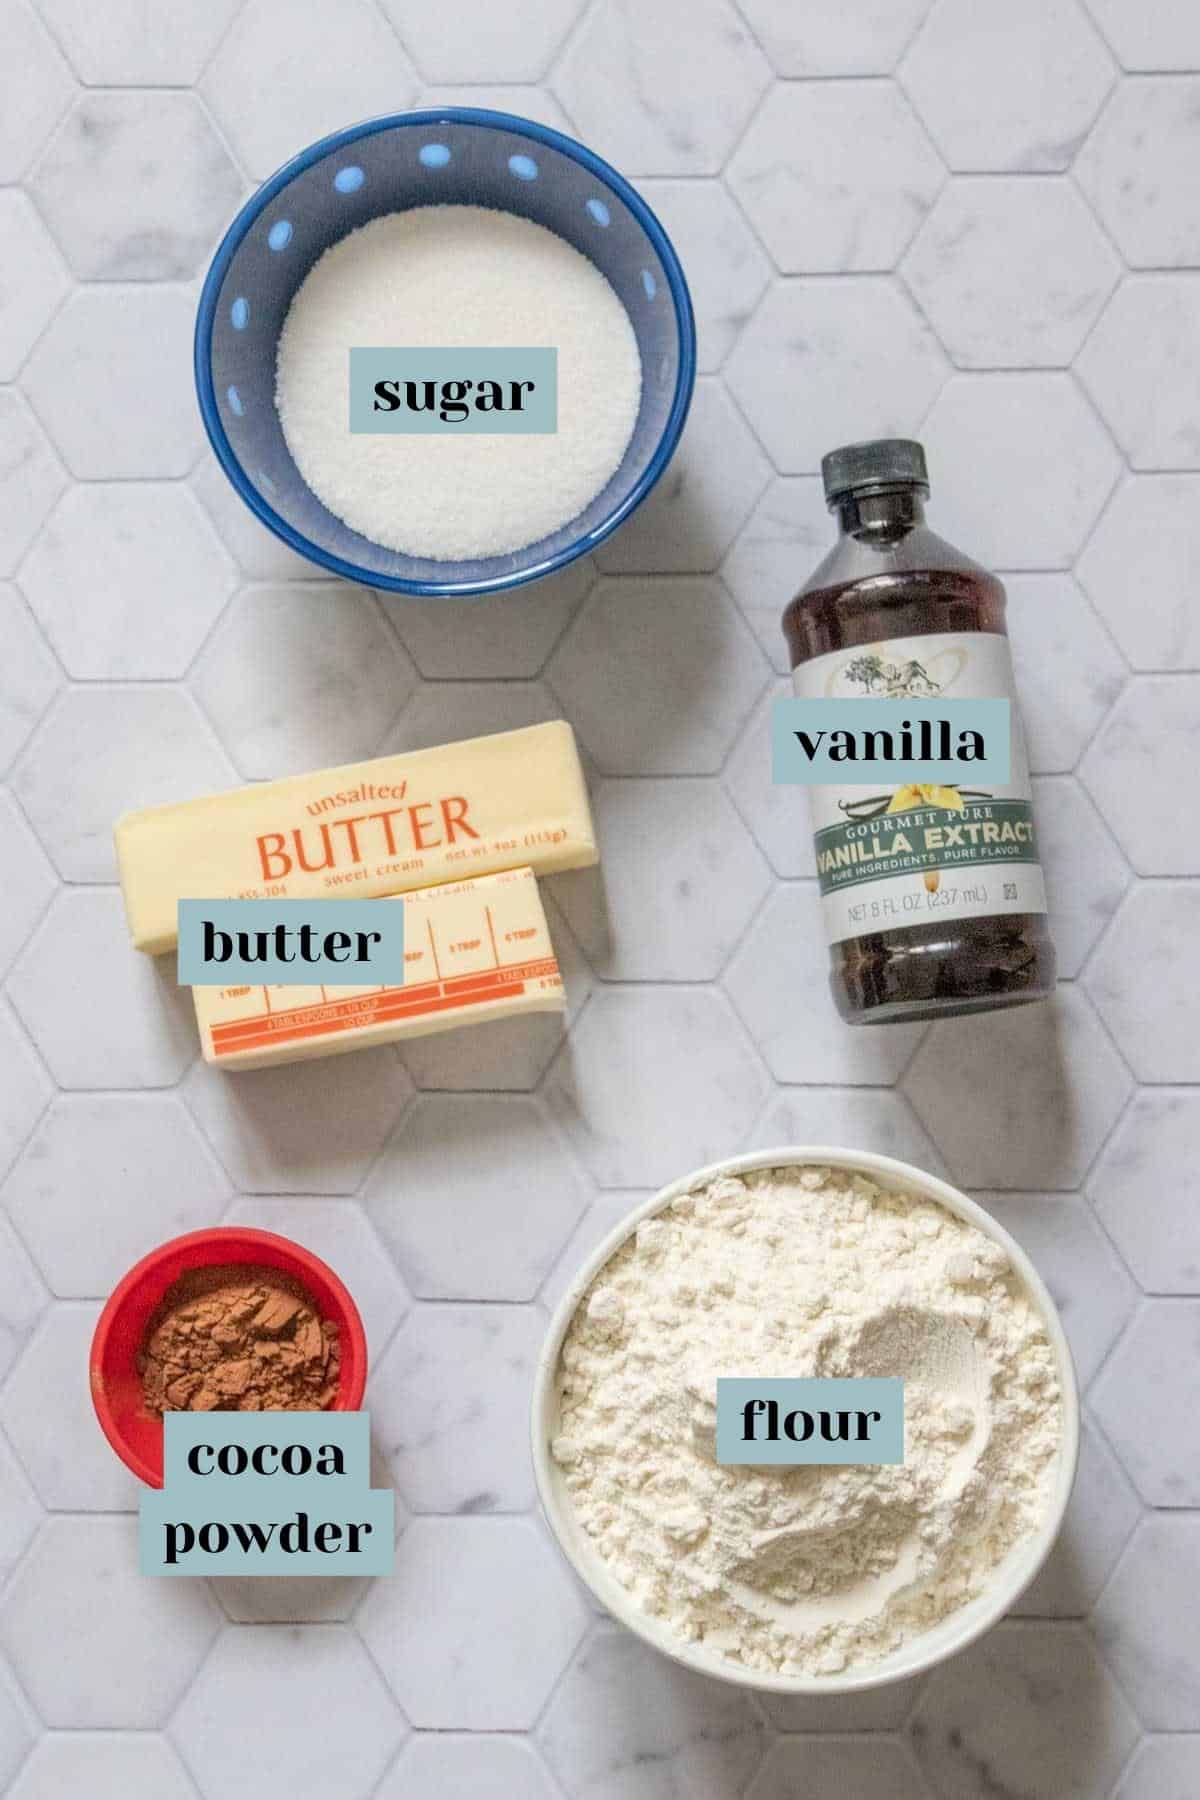 Ingredients for checkerboard cookies on a tile surface with labels.